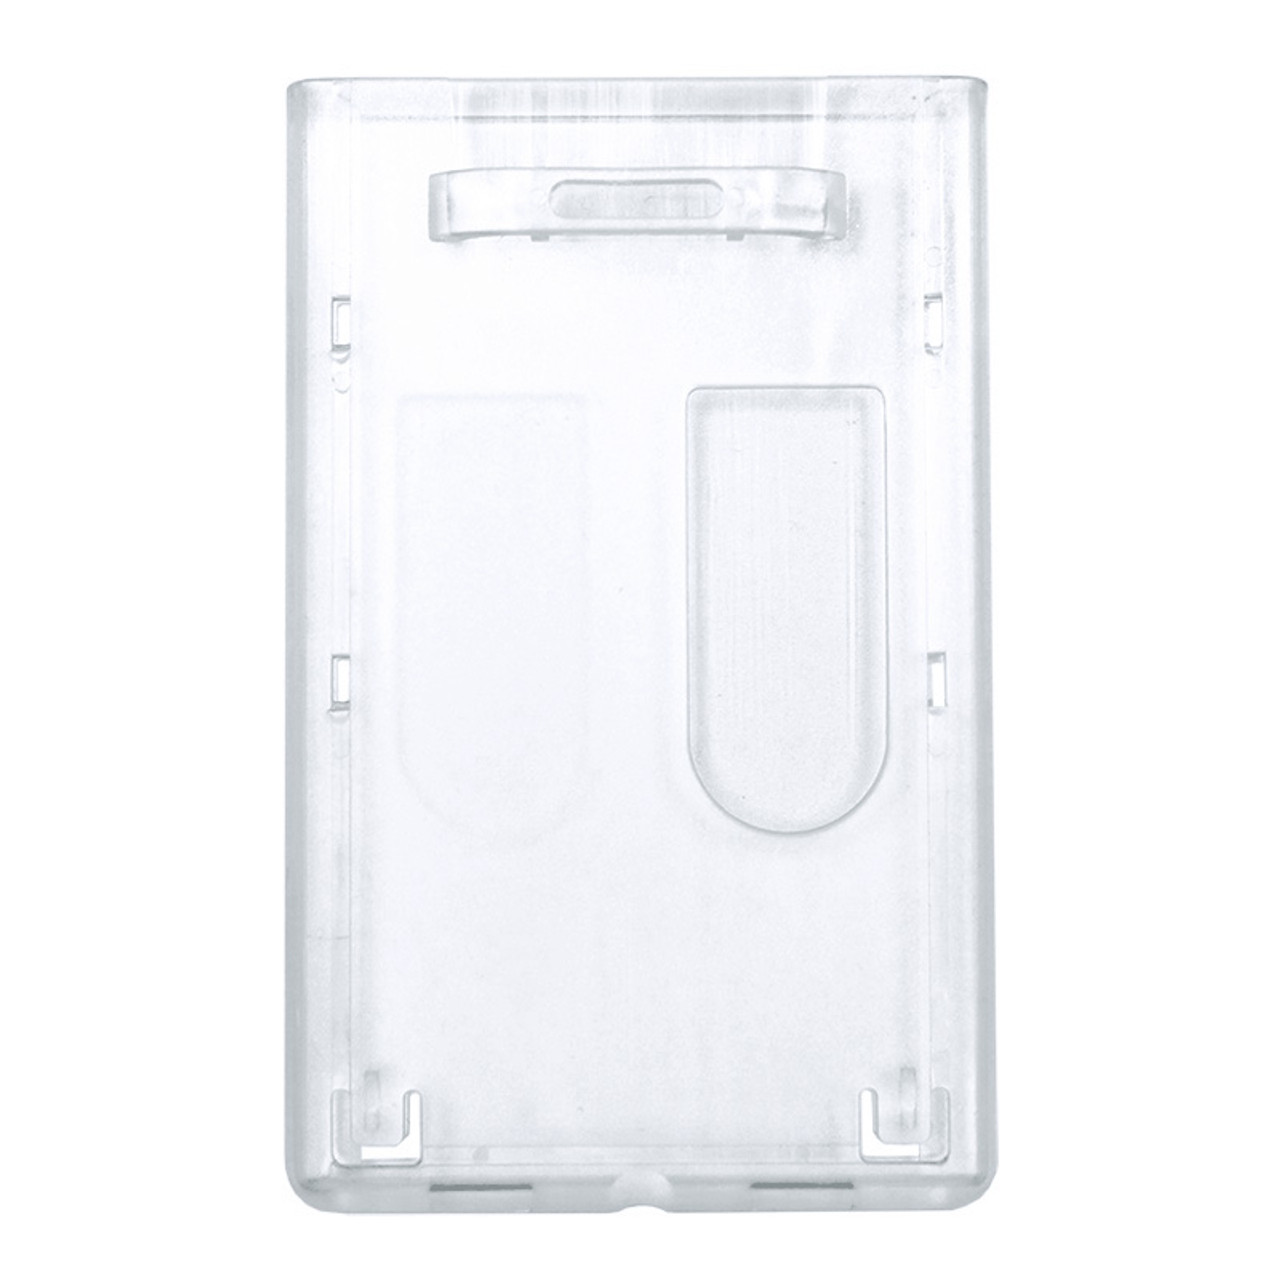 Holder-Rigid-Dual Card Holder-Vert-Top Load-Clear: OUTER- 2.26in X 3.62in  INSERT- 2.12in X 3.37in 